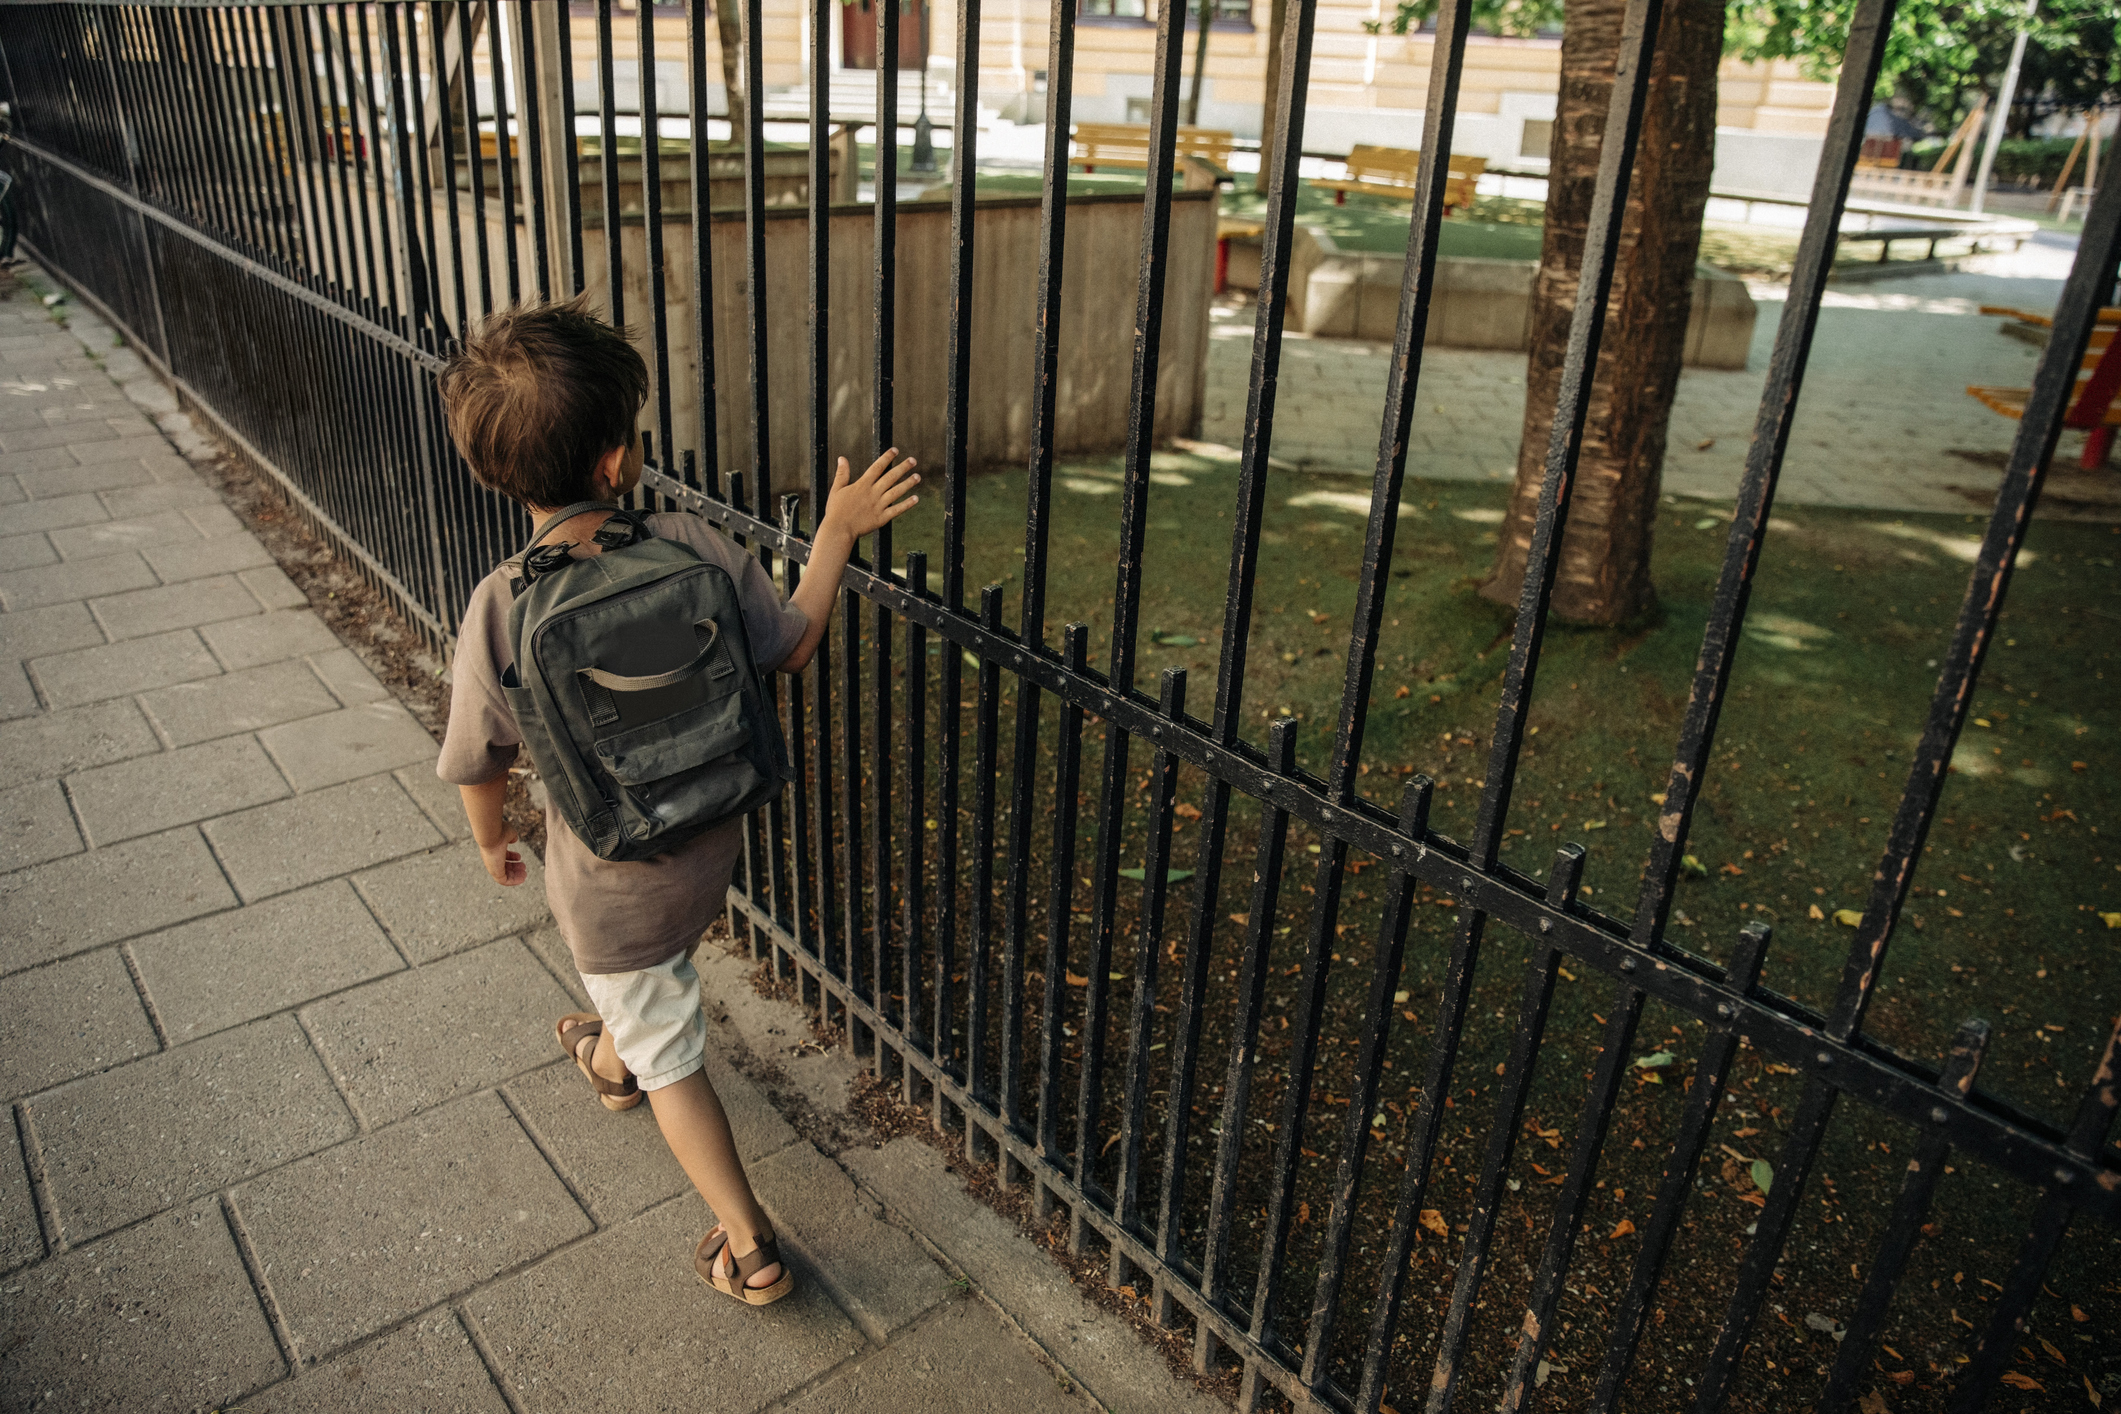 A young boy wearing a backpack walks along a fenced playground, touching the bars with his hand